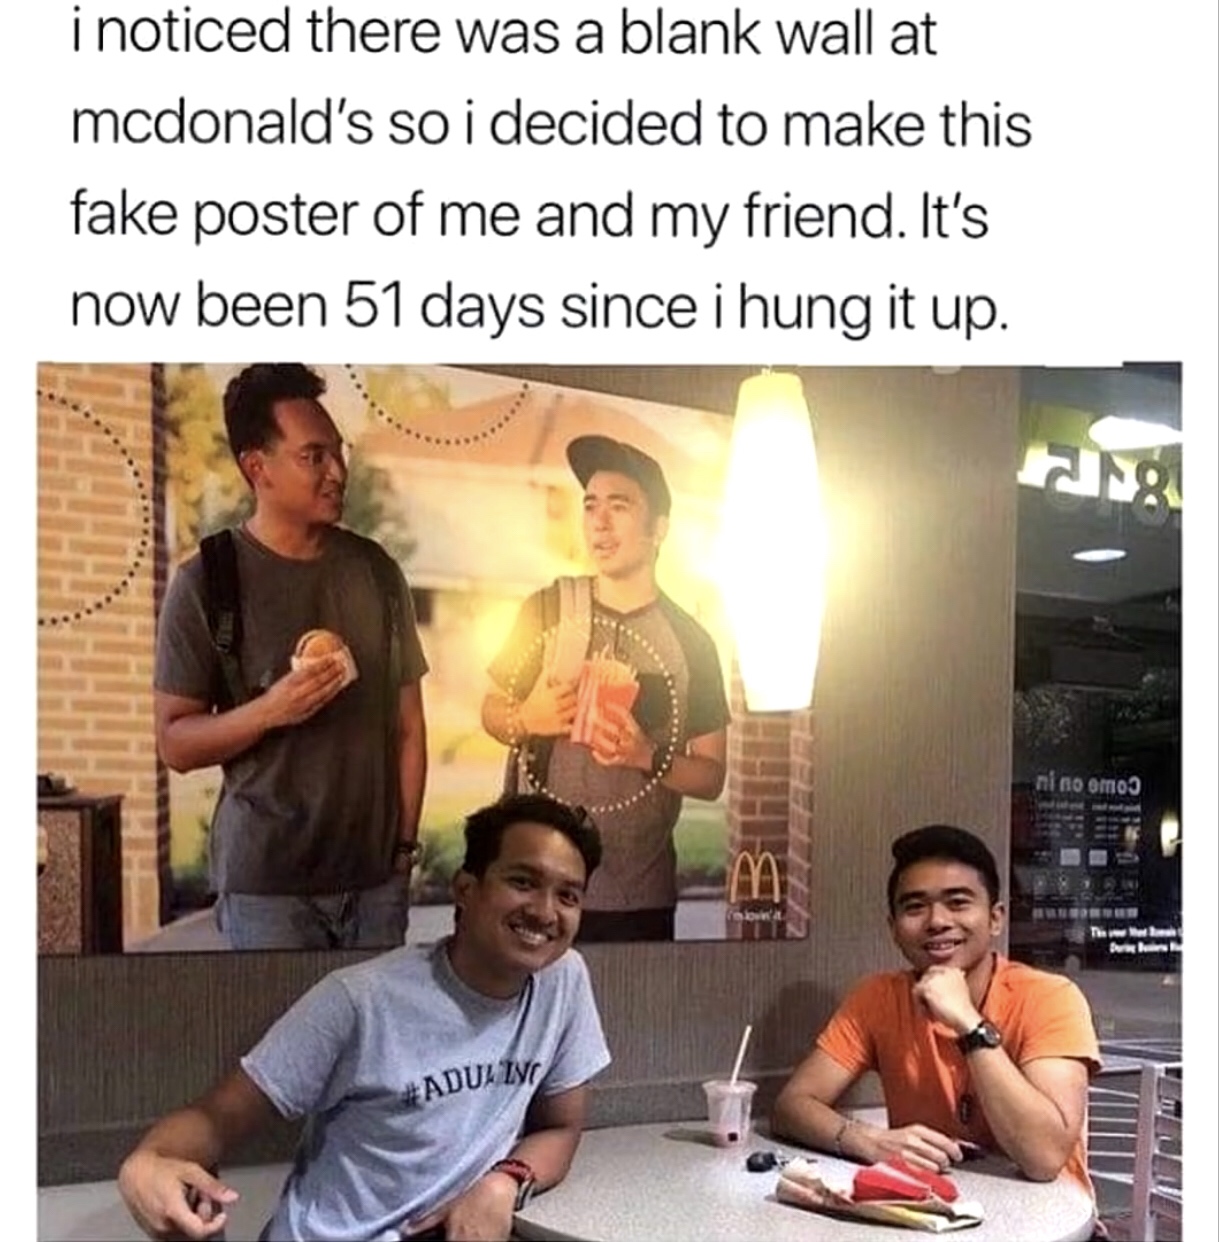 fake mcdonalds poster - i noticed there was a blank wall at mcdonald's so i decided to make this fake poster of me and my friend. It's now been 51 days since i hung it up. ni no omog Adul Inc